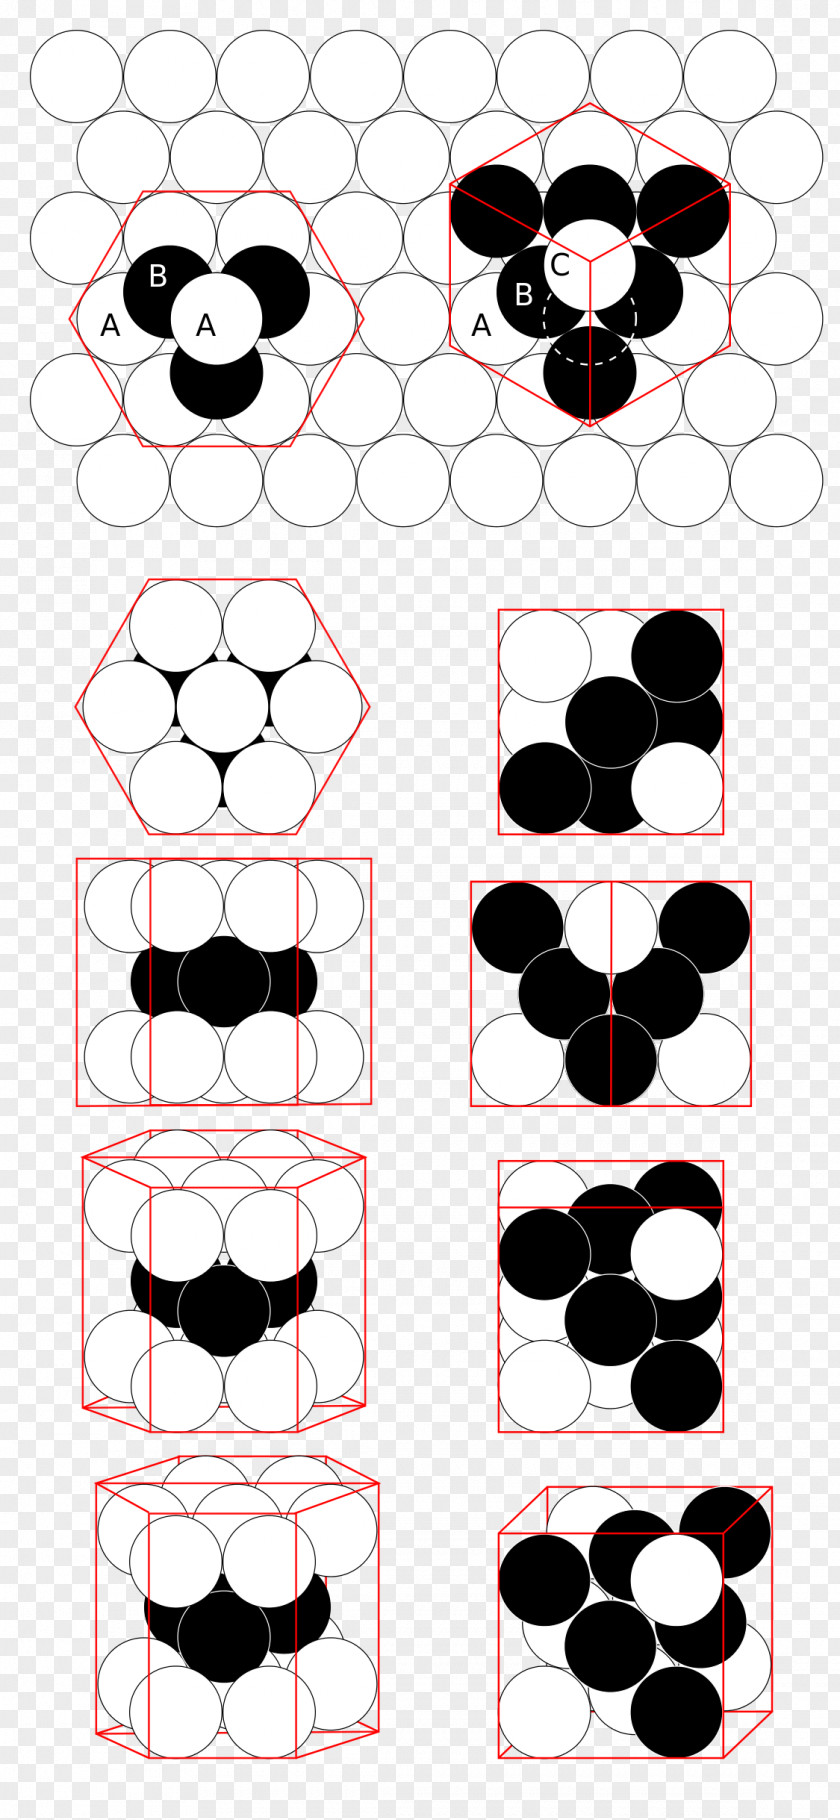 Hexagonal Box Close-packing Of Equal Spheres Packing Problems Sphere Cubic Crystal System Atomic Factor PNG